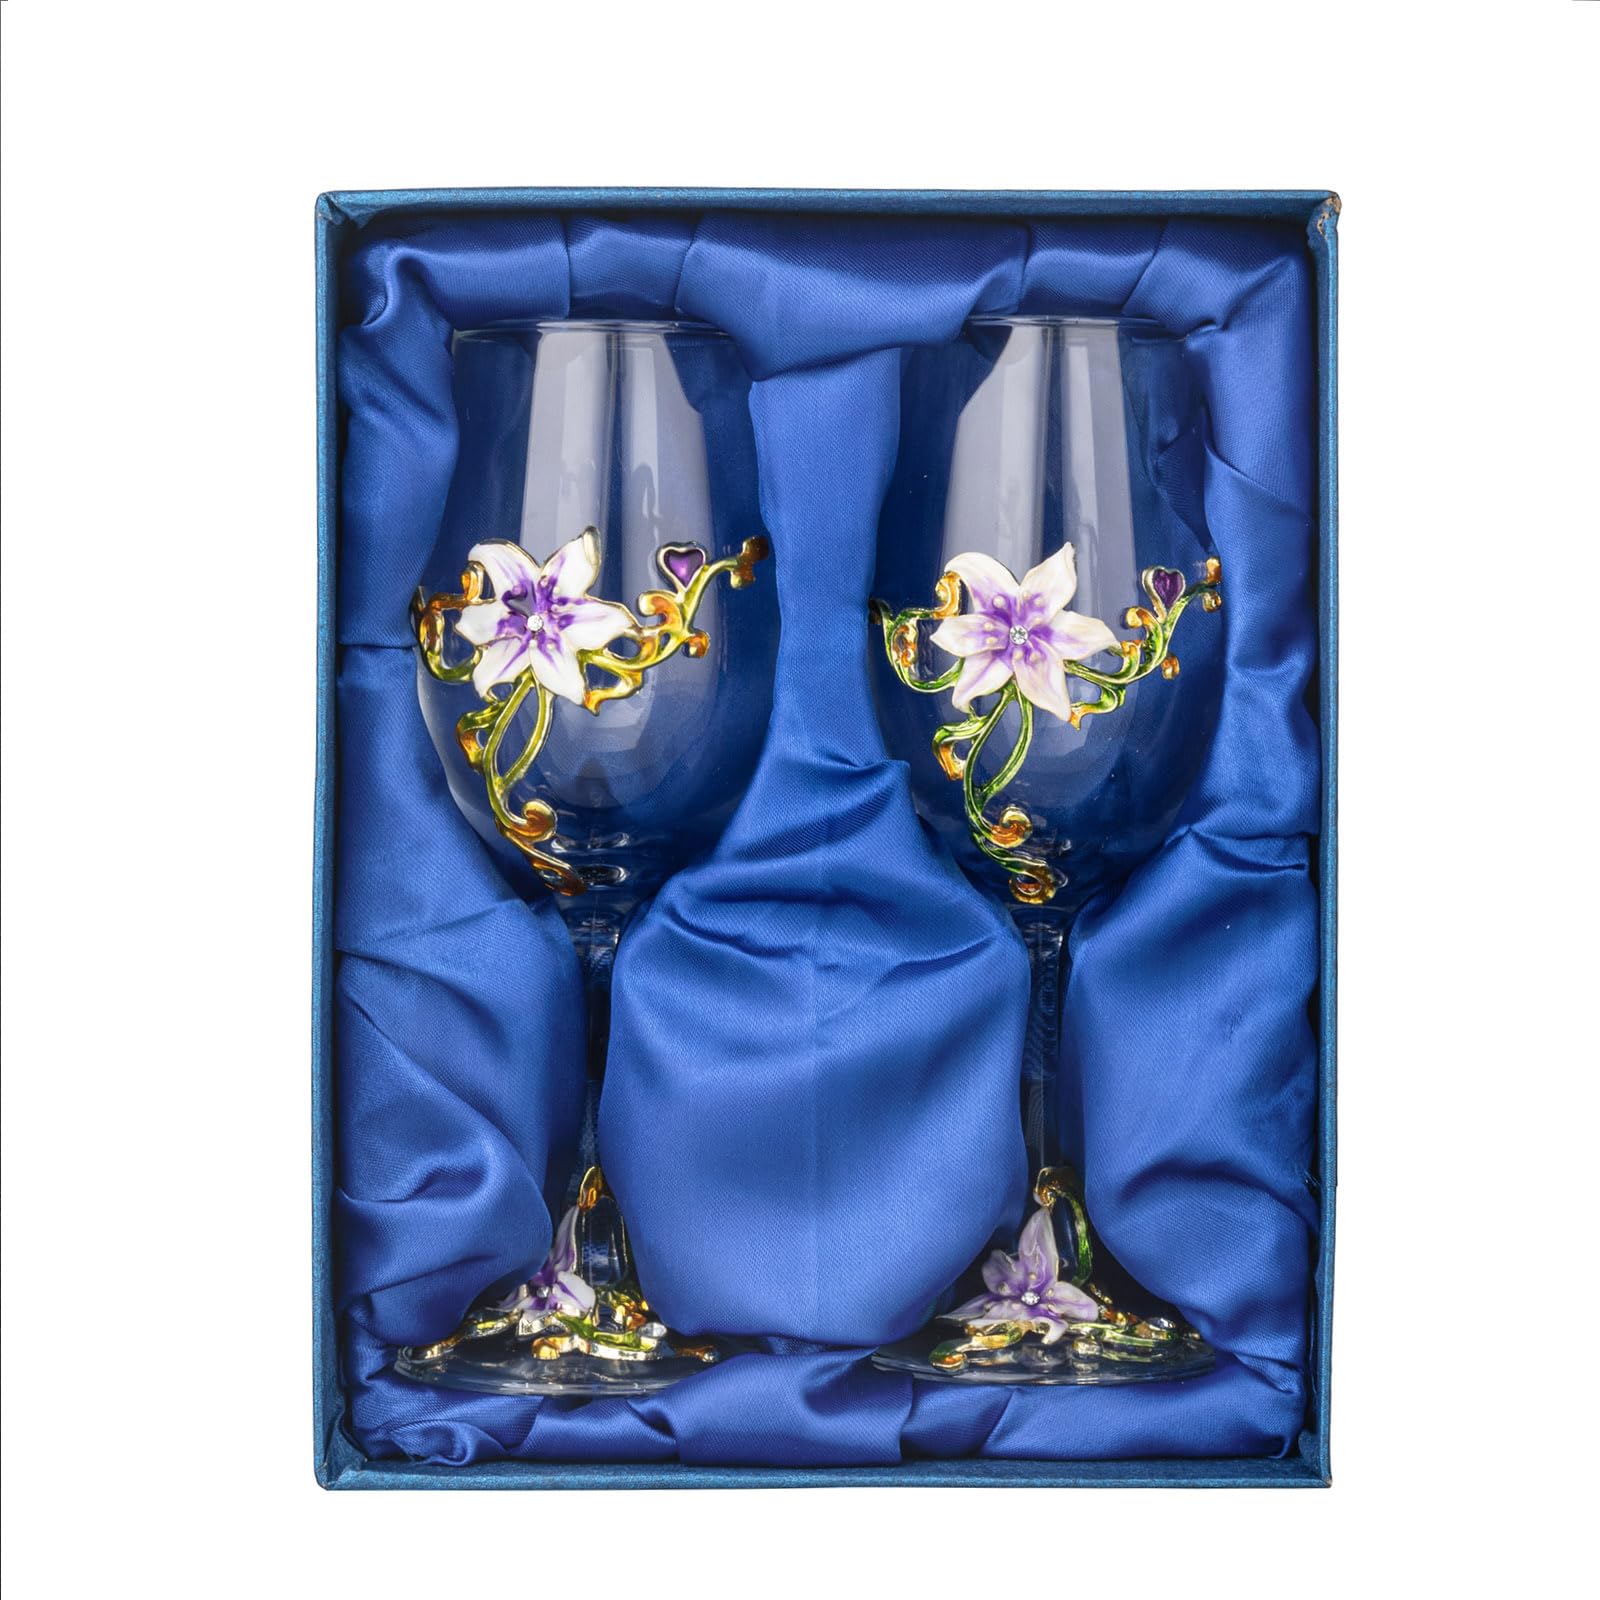 Simcat Handmade Painted Enamel Flower Glass Wine Glasses Transparent Refined Goblet, Stem For Cabernet, Gifts (Purple double gift box,2 Gift Box)